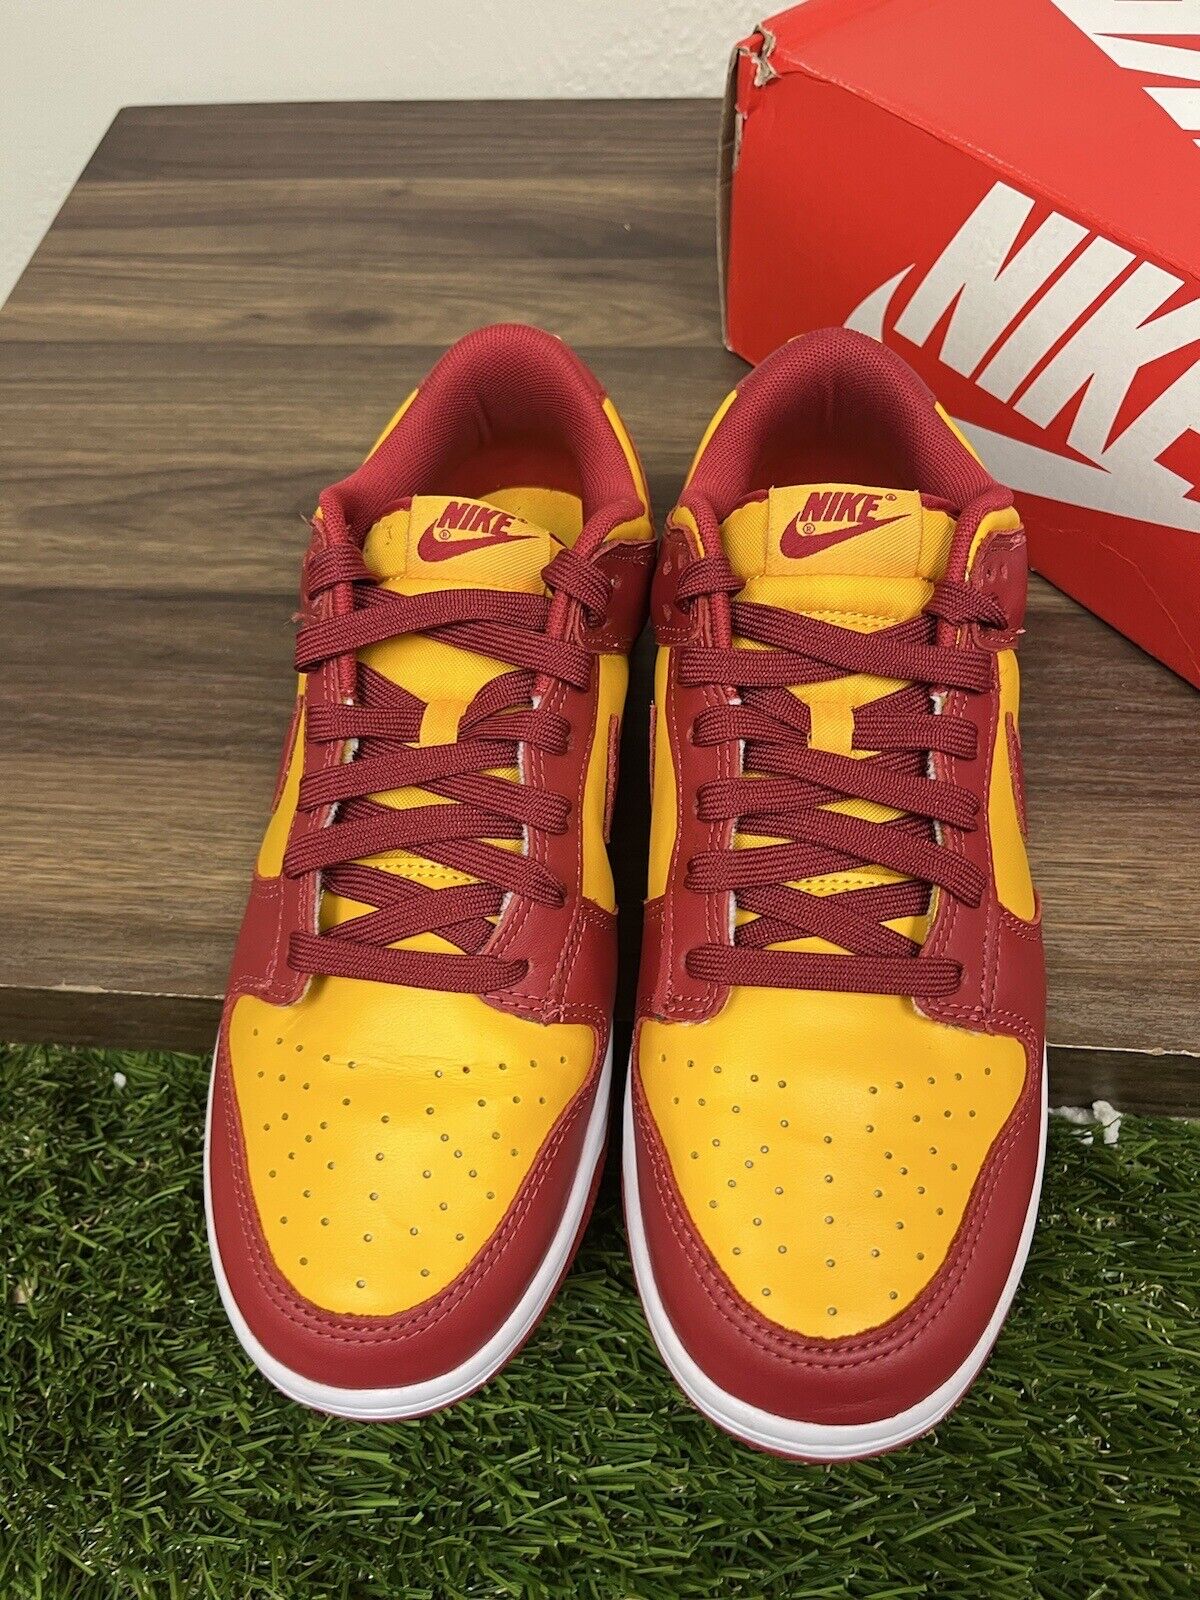 Size 8.5 - Nike Dunk Low Midas Gold used